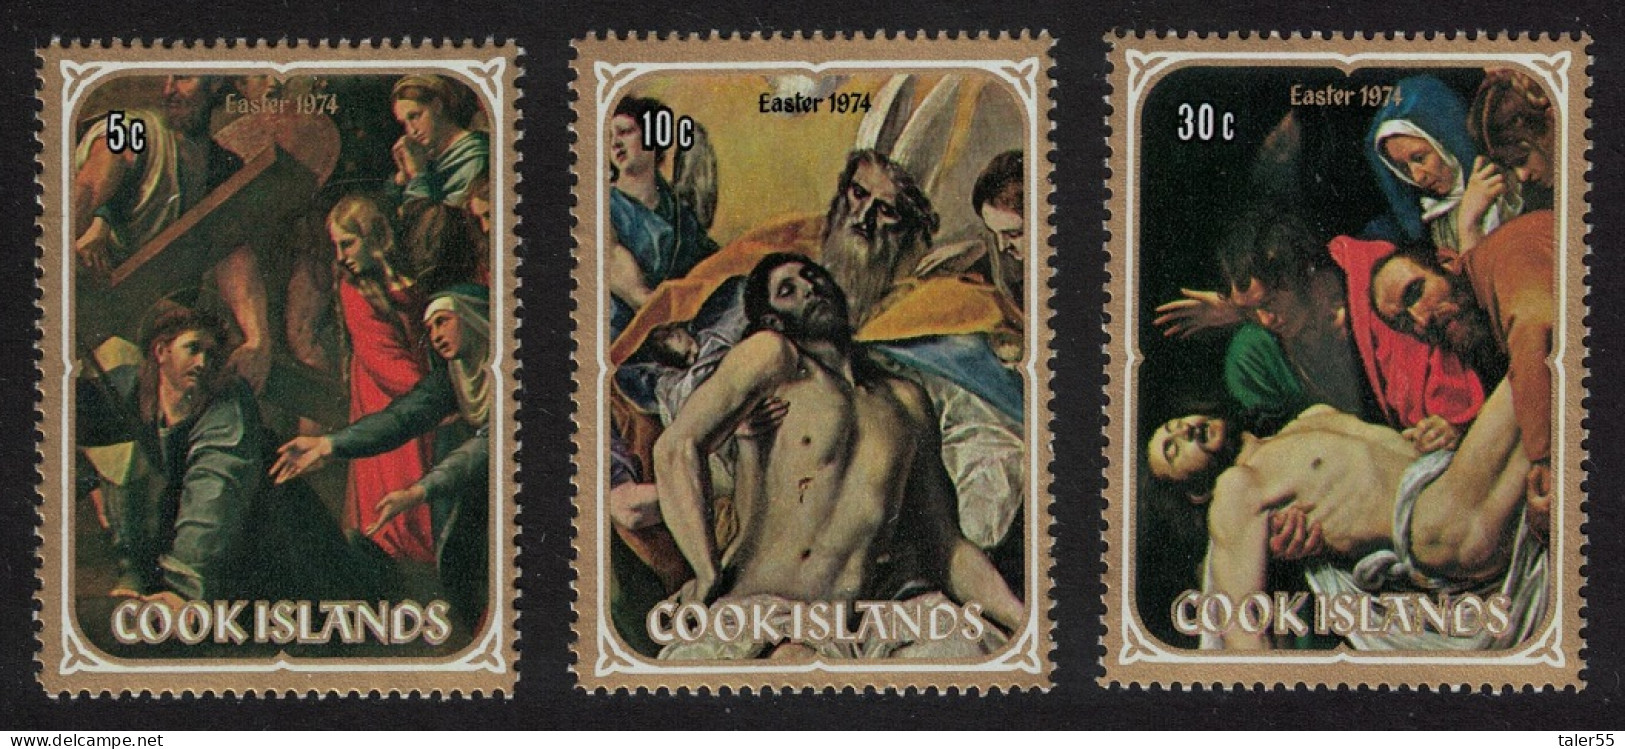 Cook Is. Easter Painting Raphael El Greco Caravaggio 3v 1974 MNH SG#461-63 - Islas Cook